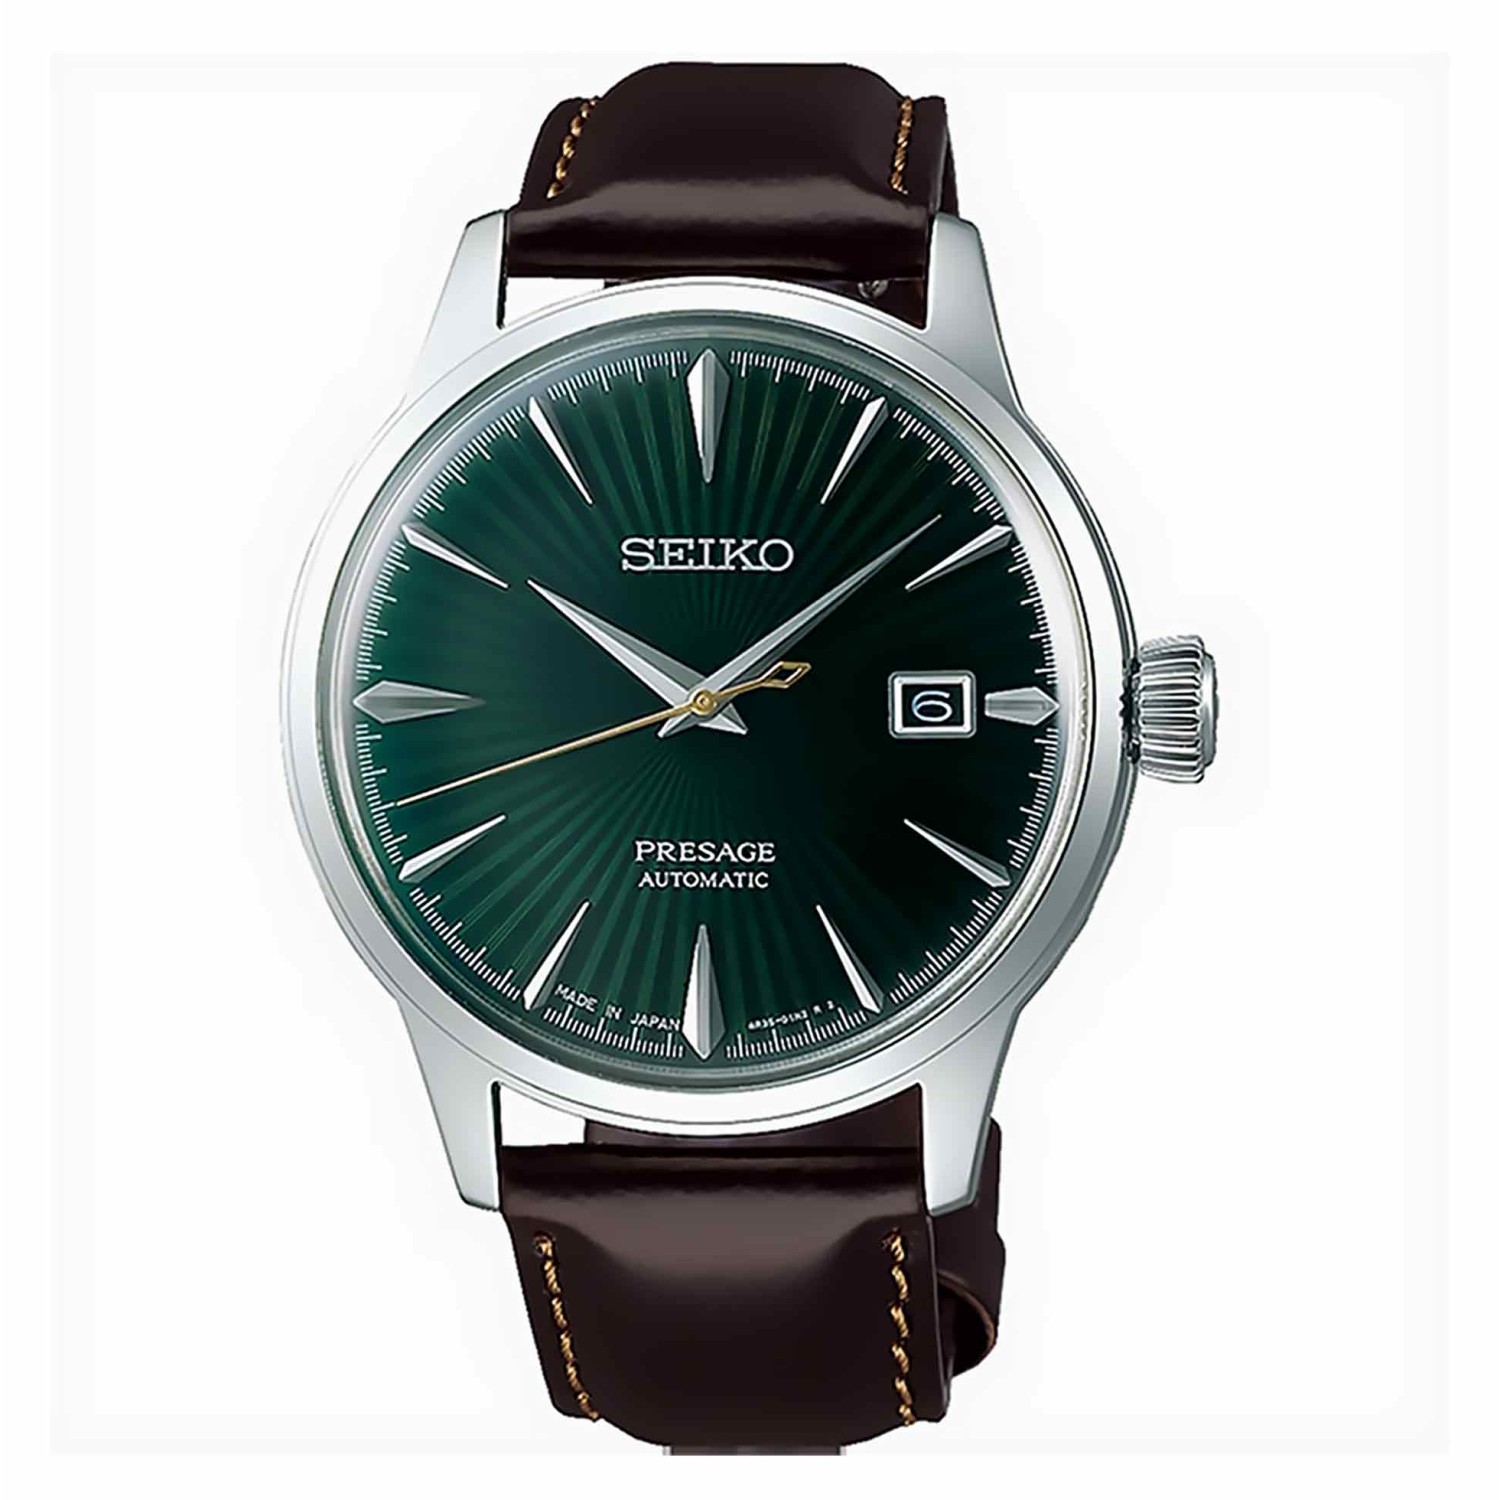 SRPD37J SEIKO Presage Cocktail Mens Automatic Watch. Available online or  at your Seiko Watch Specialist  - Christies Papatoetoe and Watch Station Manukau.   3 Months No Payments and Interest for Q Card holders LAYBUY - Pay it easy, in 6 weekl @christies.